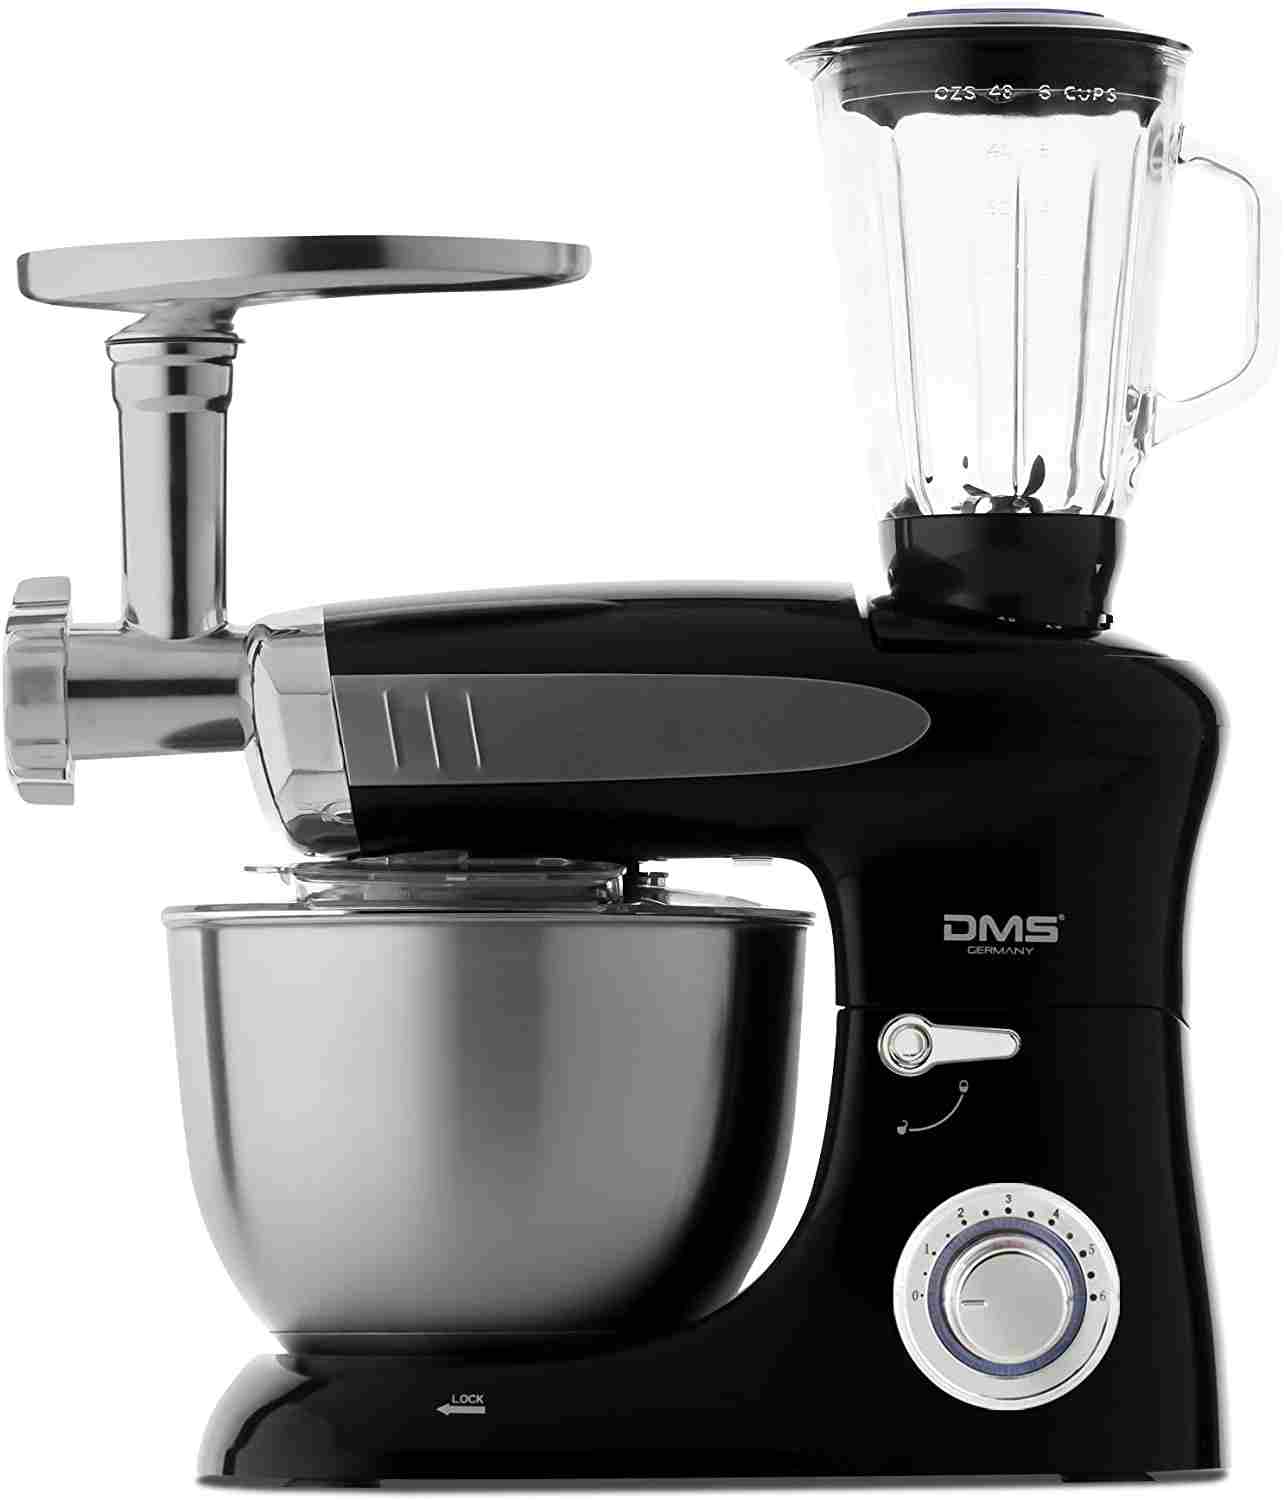 DMS KMFB-1900 3 In 1 Food Processor Mixing Machine 6.5 Litres